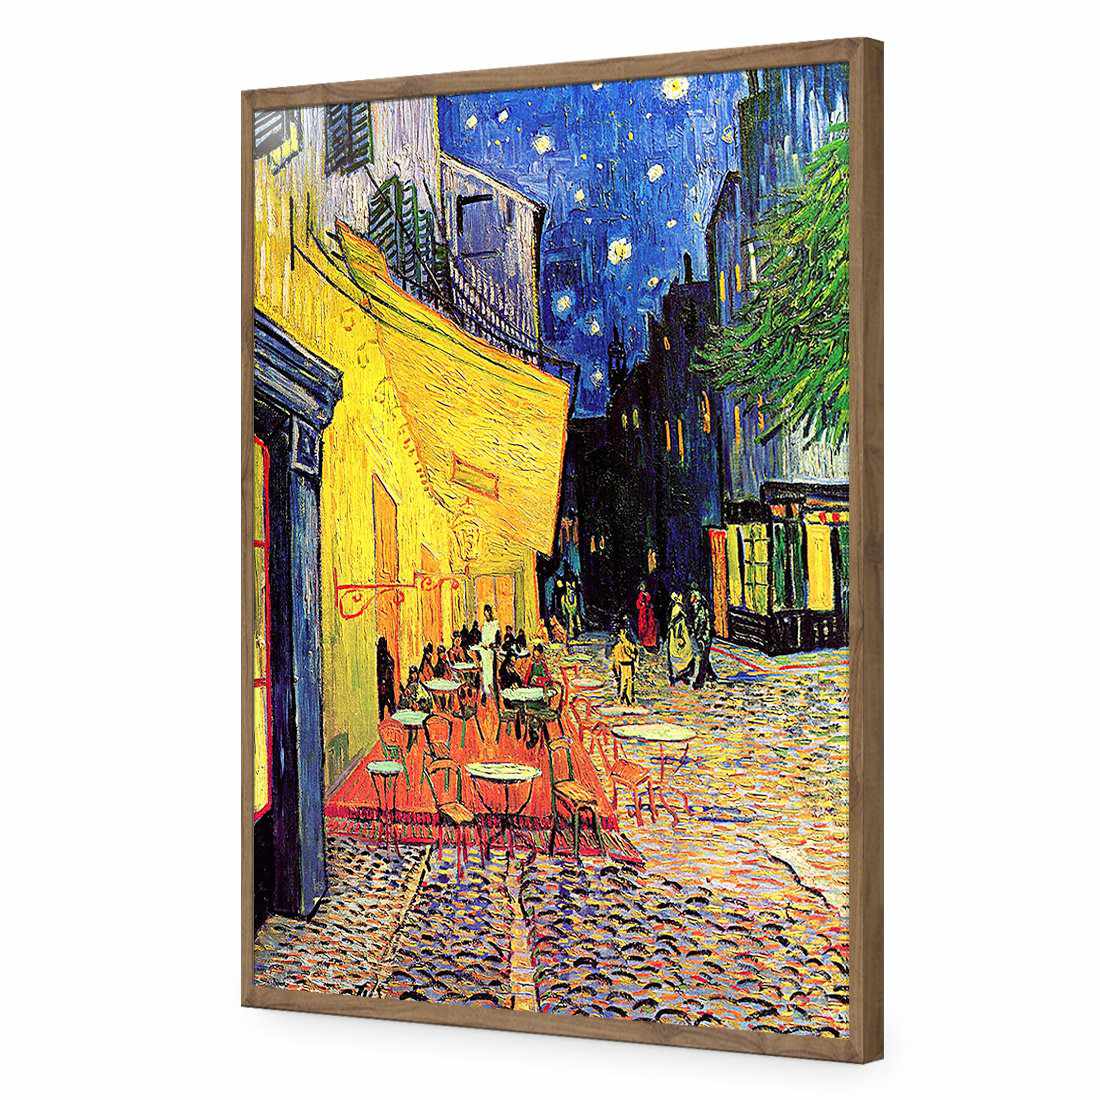 The Cafe Terrace - Van Gogh-Acrylic-Wall Art Design-Without Border-Acrylic - Natural Frame-45x30cm-Wall Art Designs